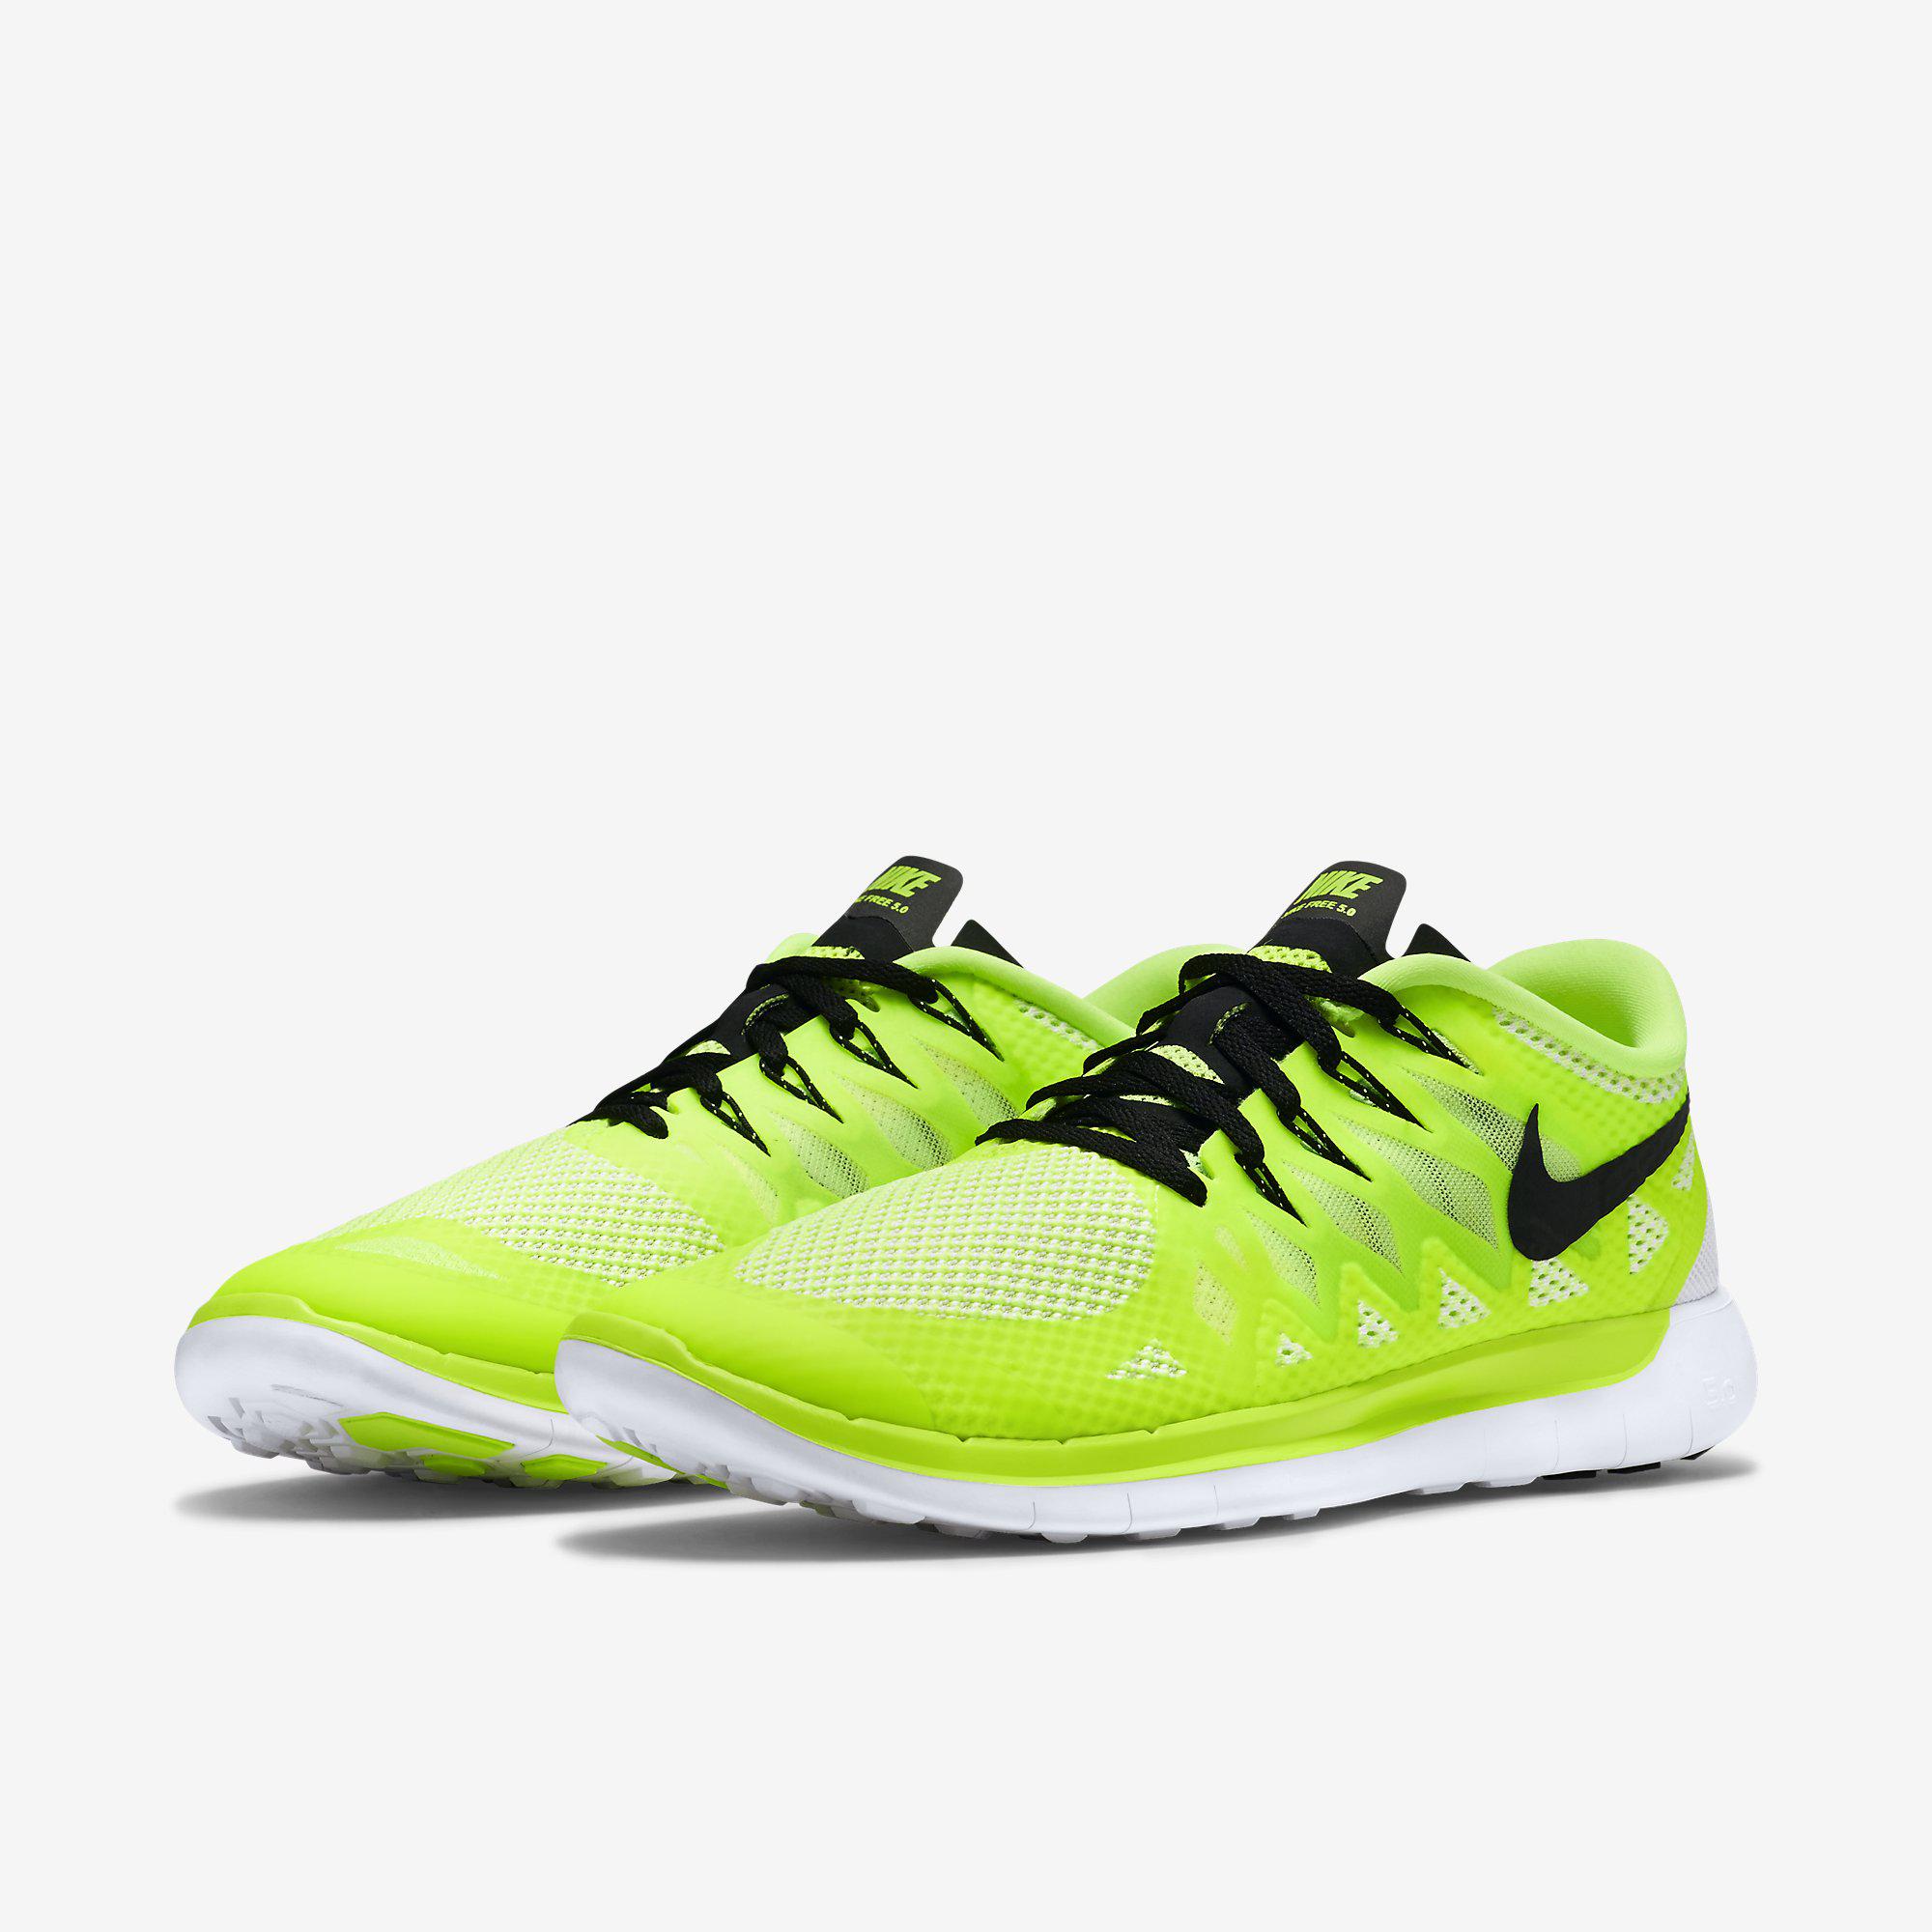 Nike Mens Free 5.0+ Running Shoes Volt